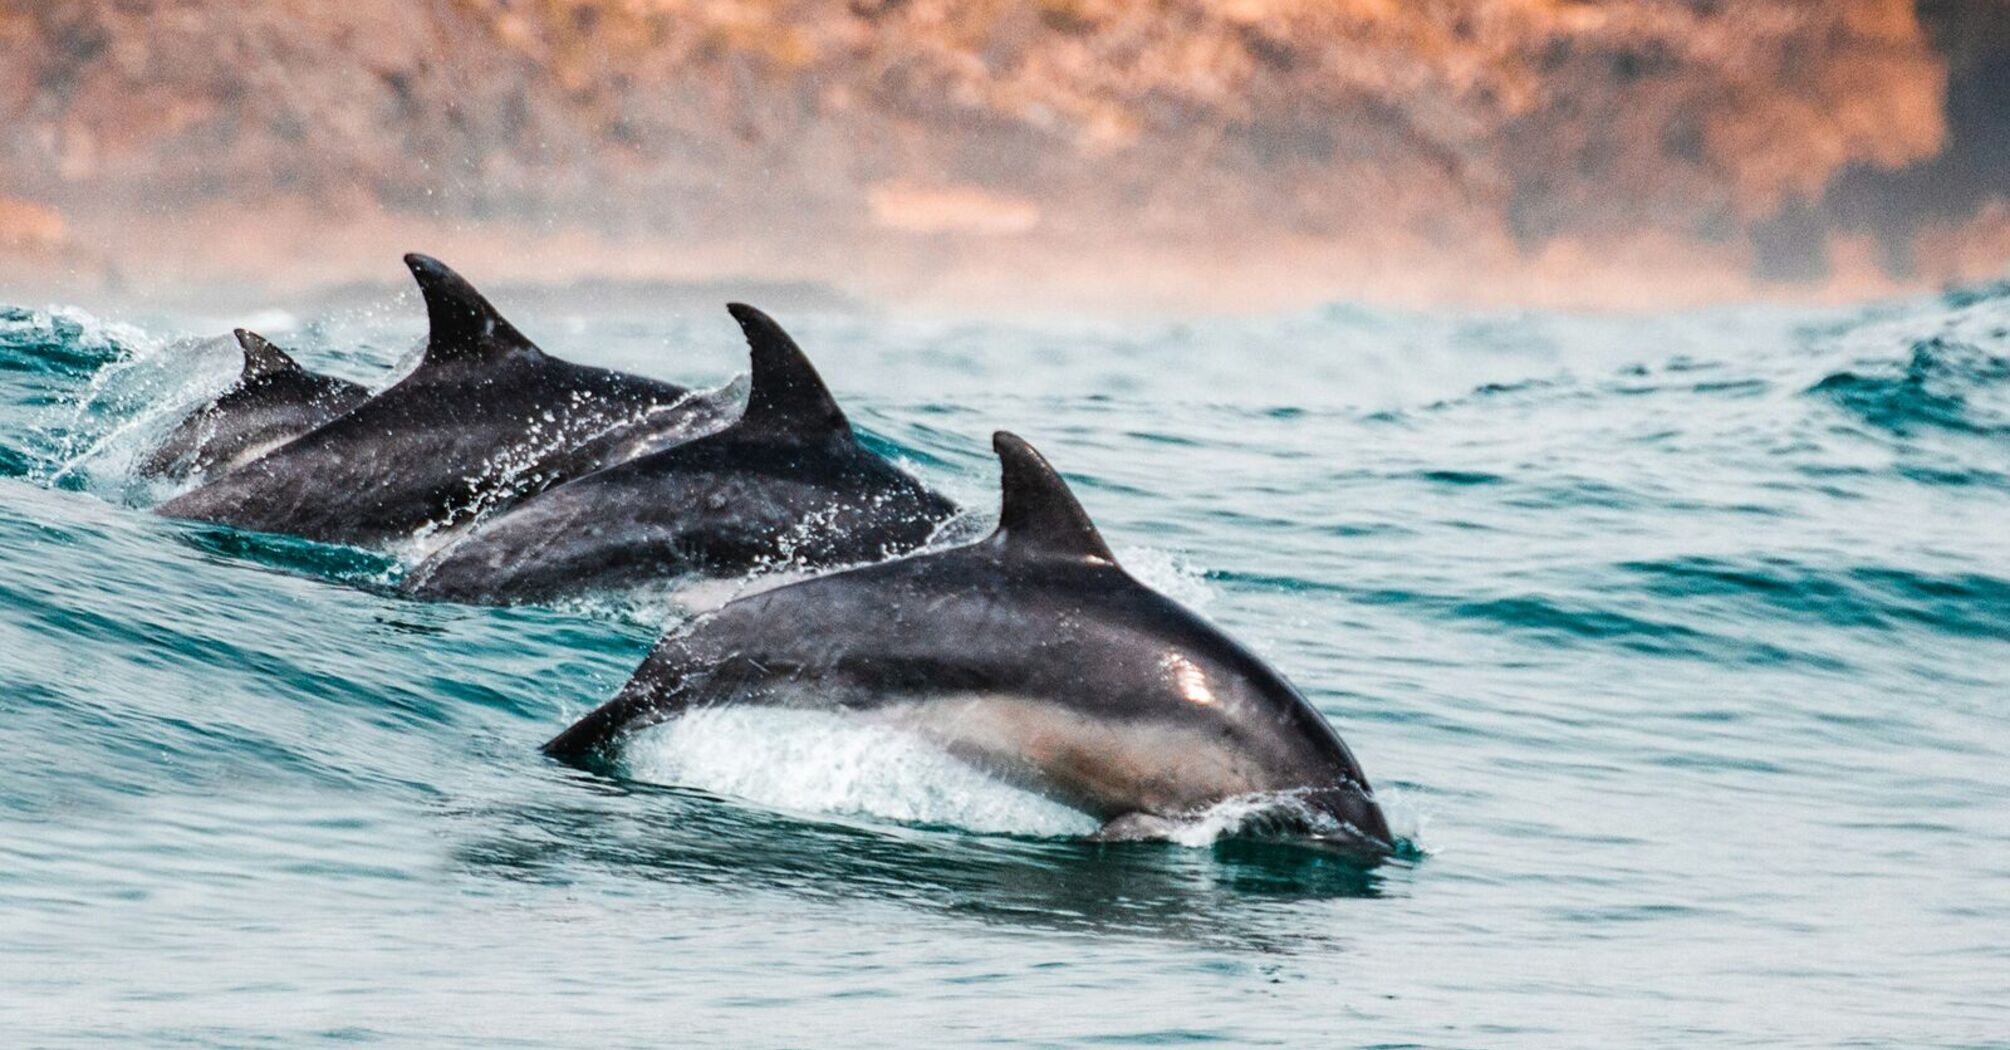 A group of dolphins swimming in the ocean